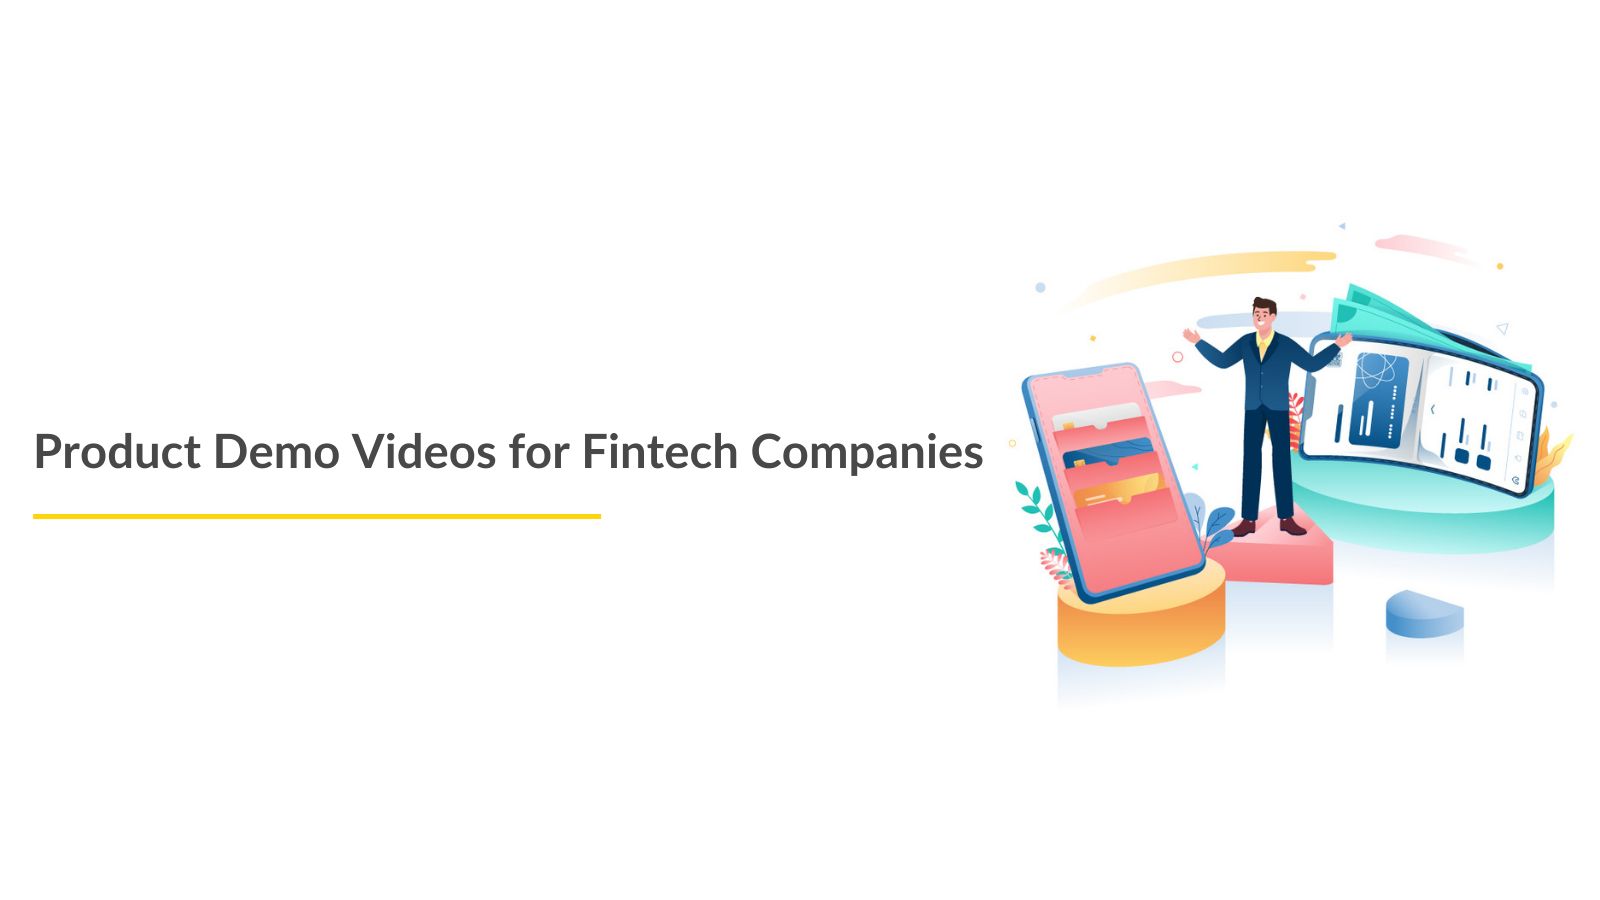 Product Demo Videos for Fintech Companies